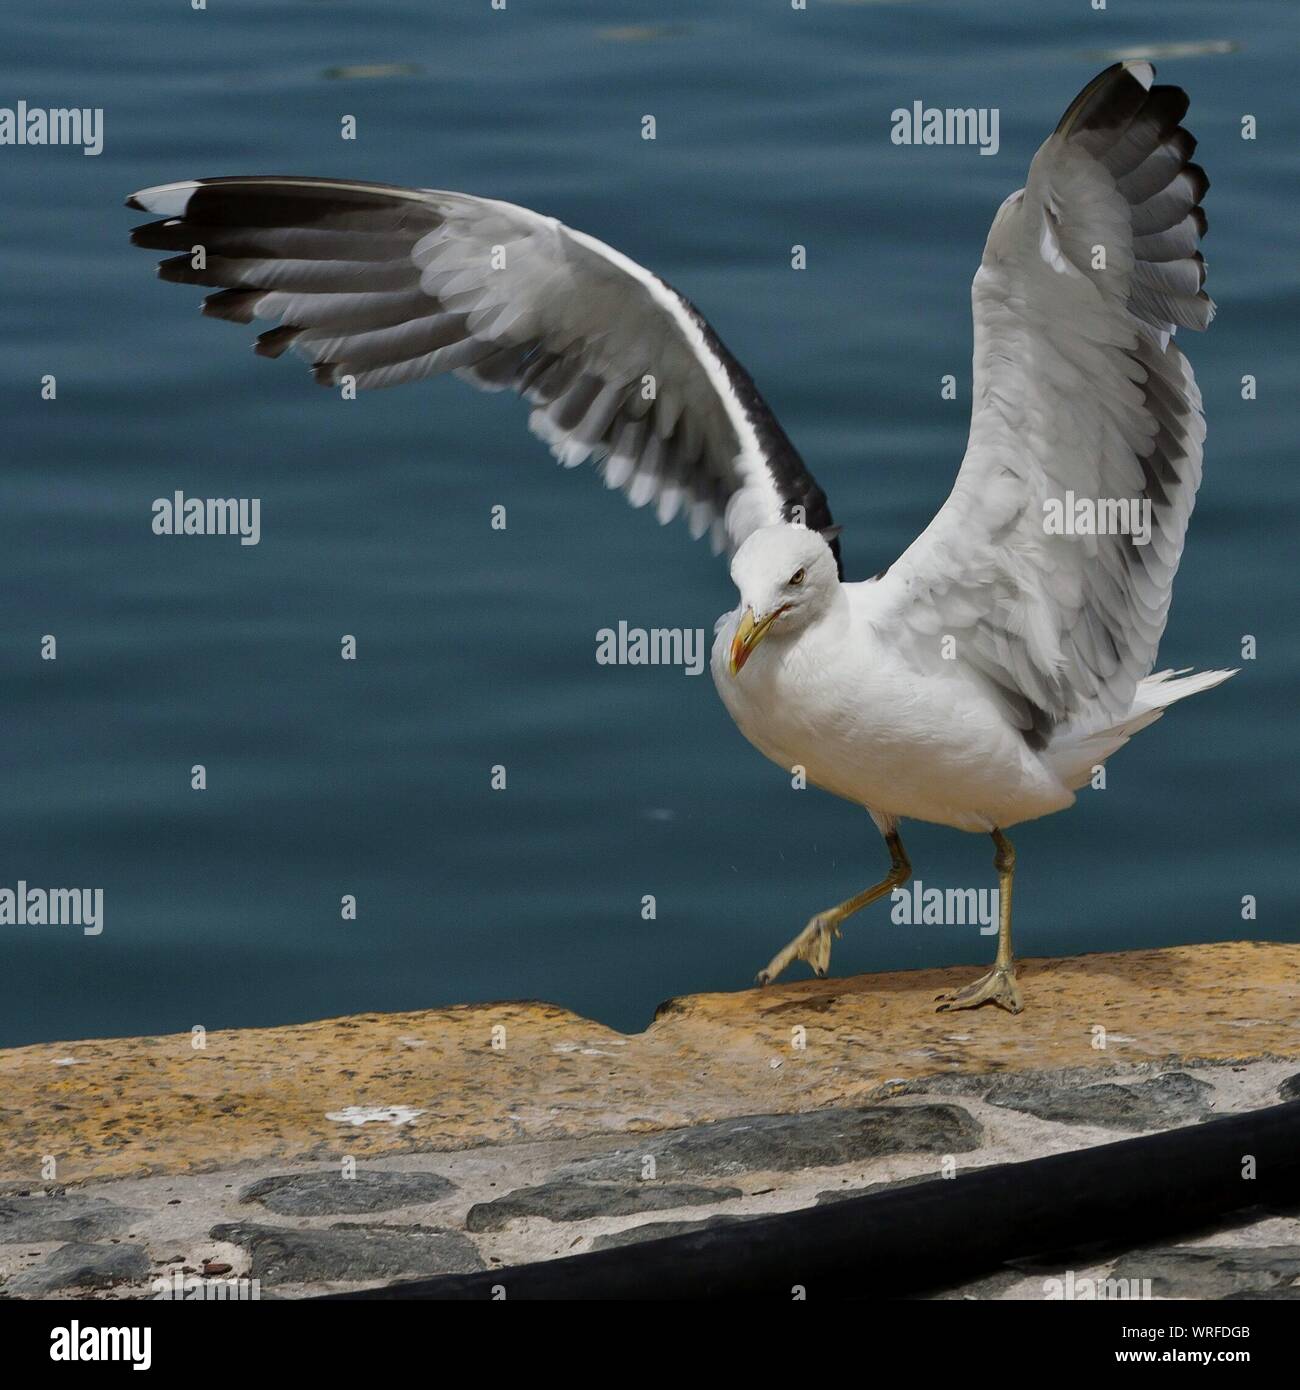 Seagull With Spread Wings Stock Photo